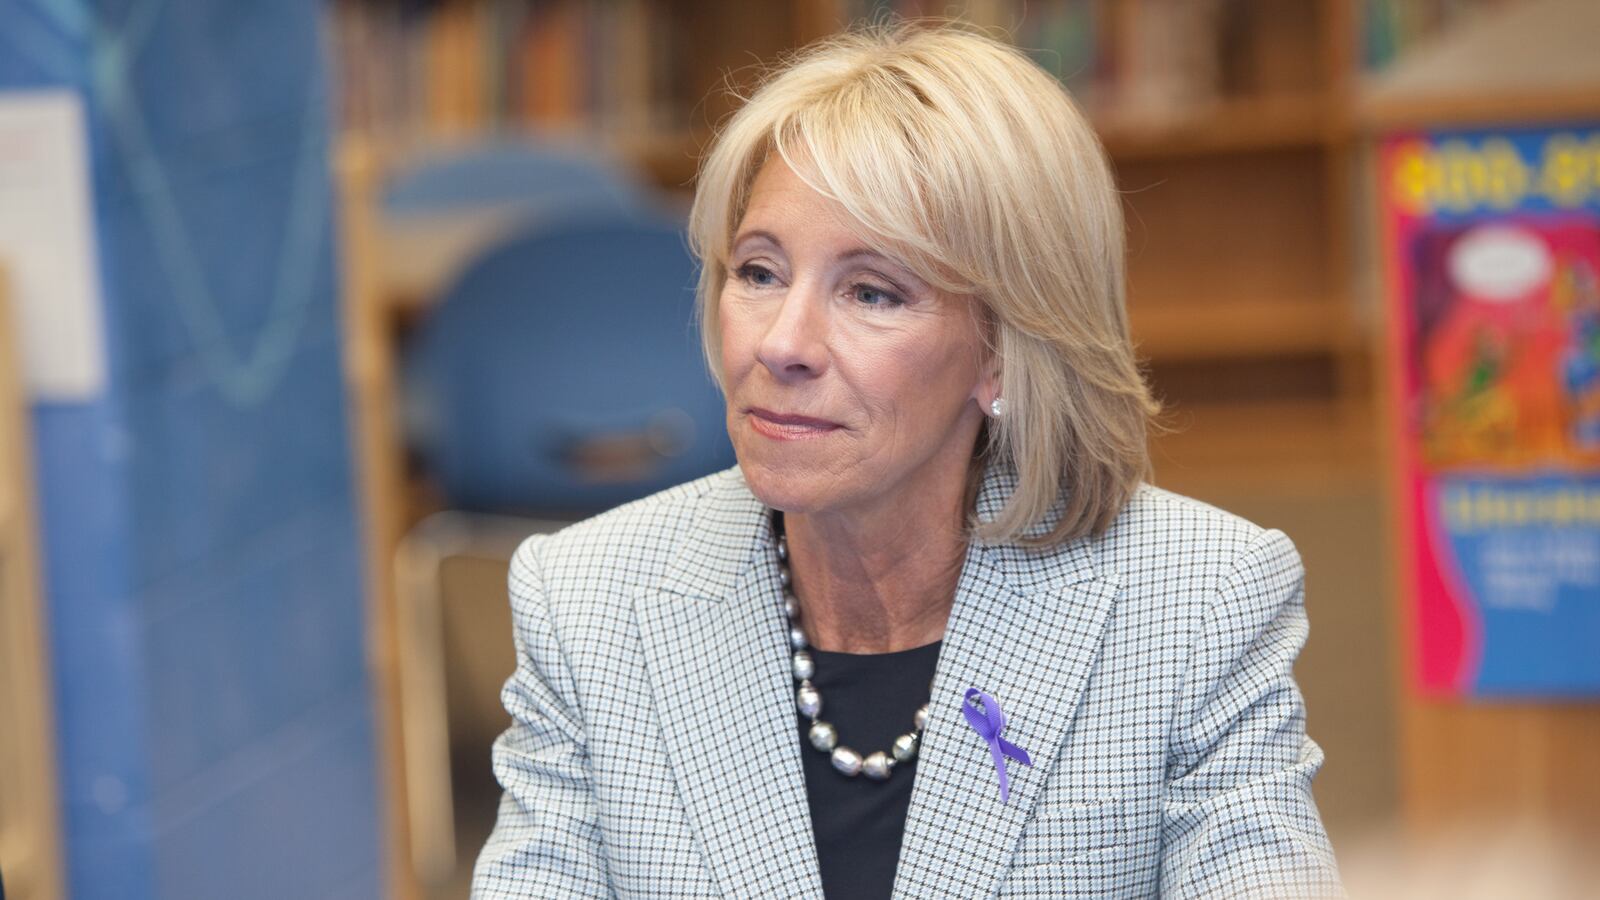 U.S. Secretary of Education Betsy DeVos is reportedly weighing whether to allow schools to pay for guns using federal money.